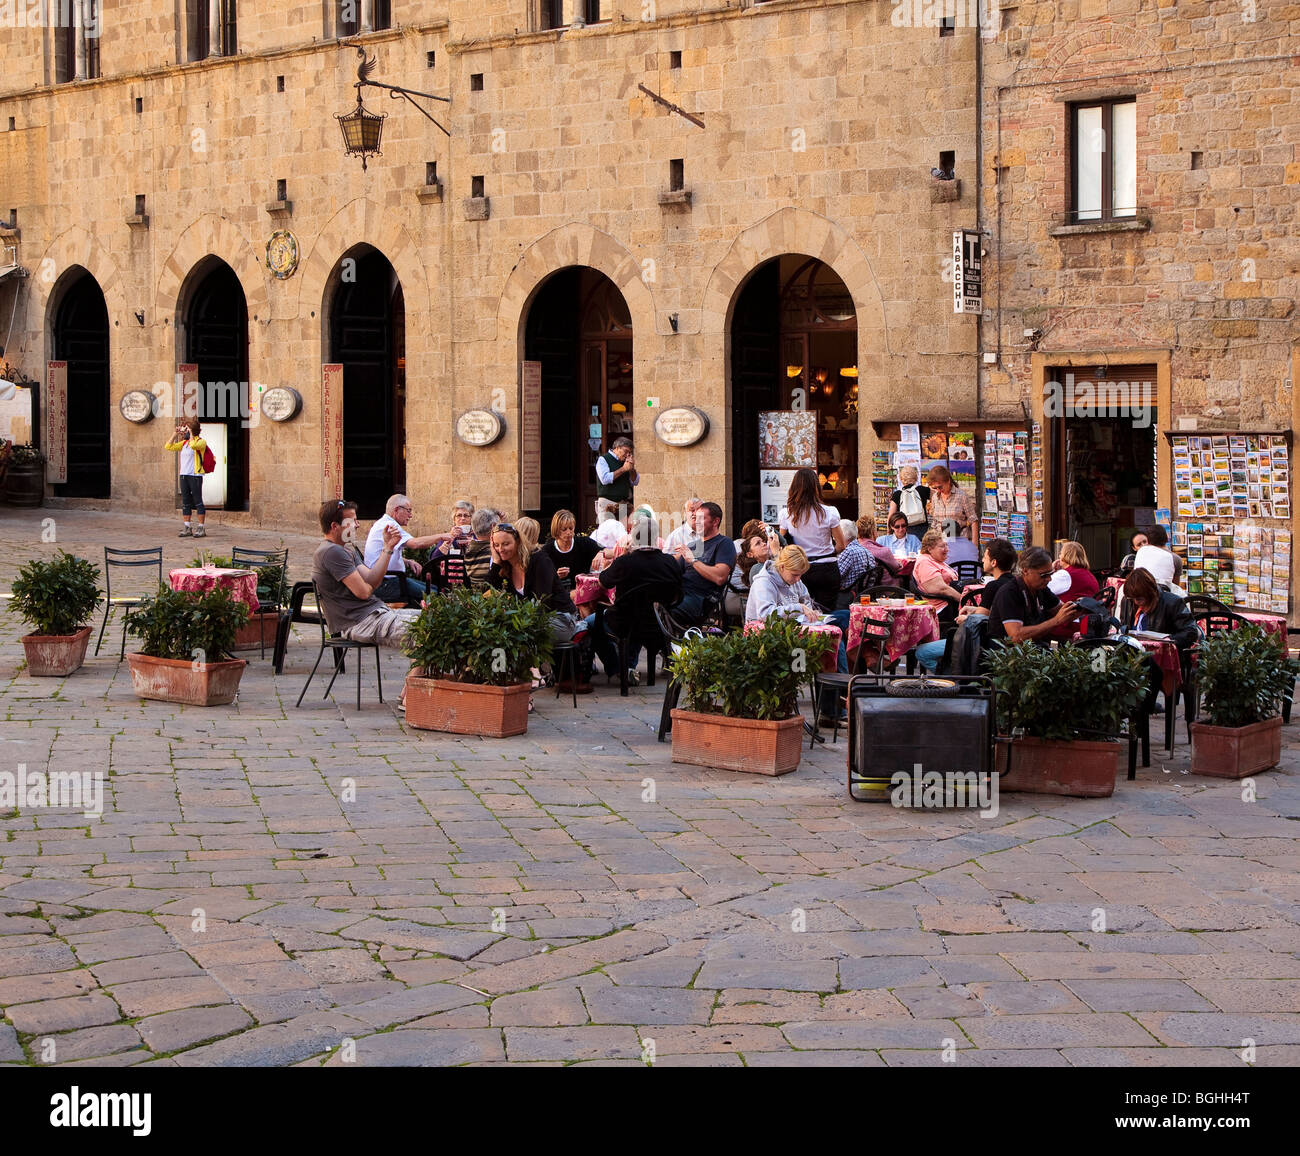 Tourists in a open air cafe in Volterra, Tuscany, Italy Stock Photo